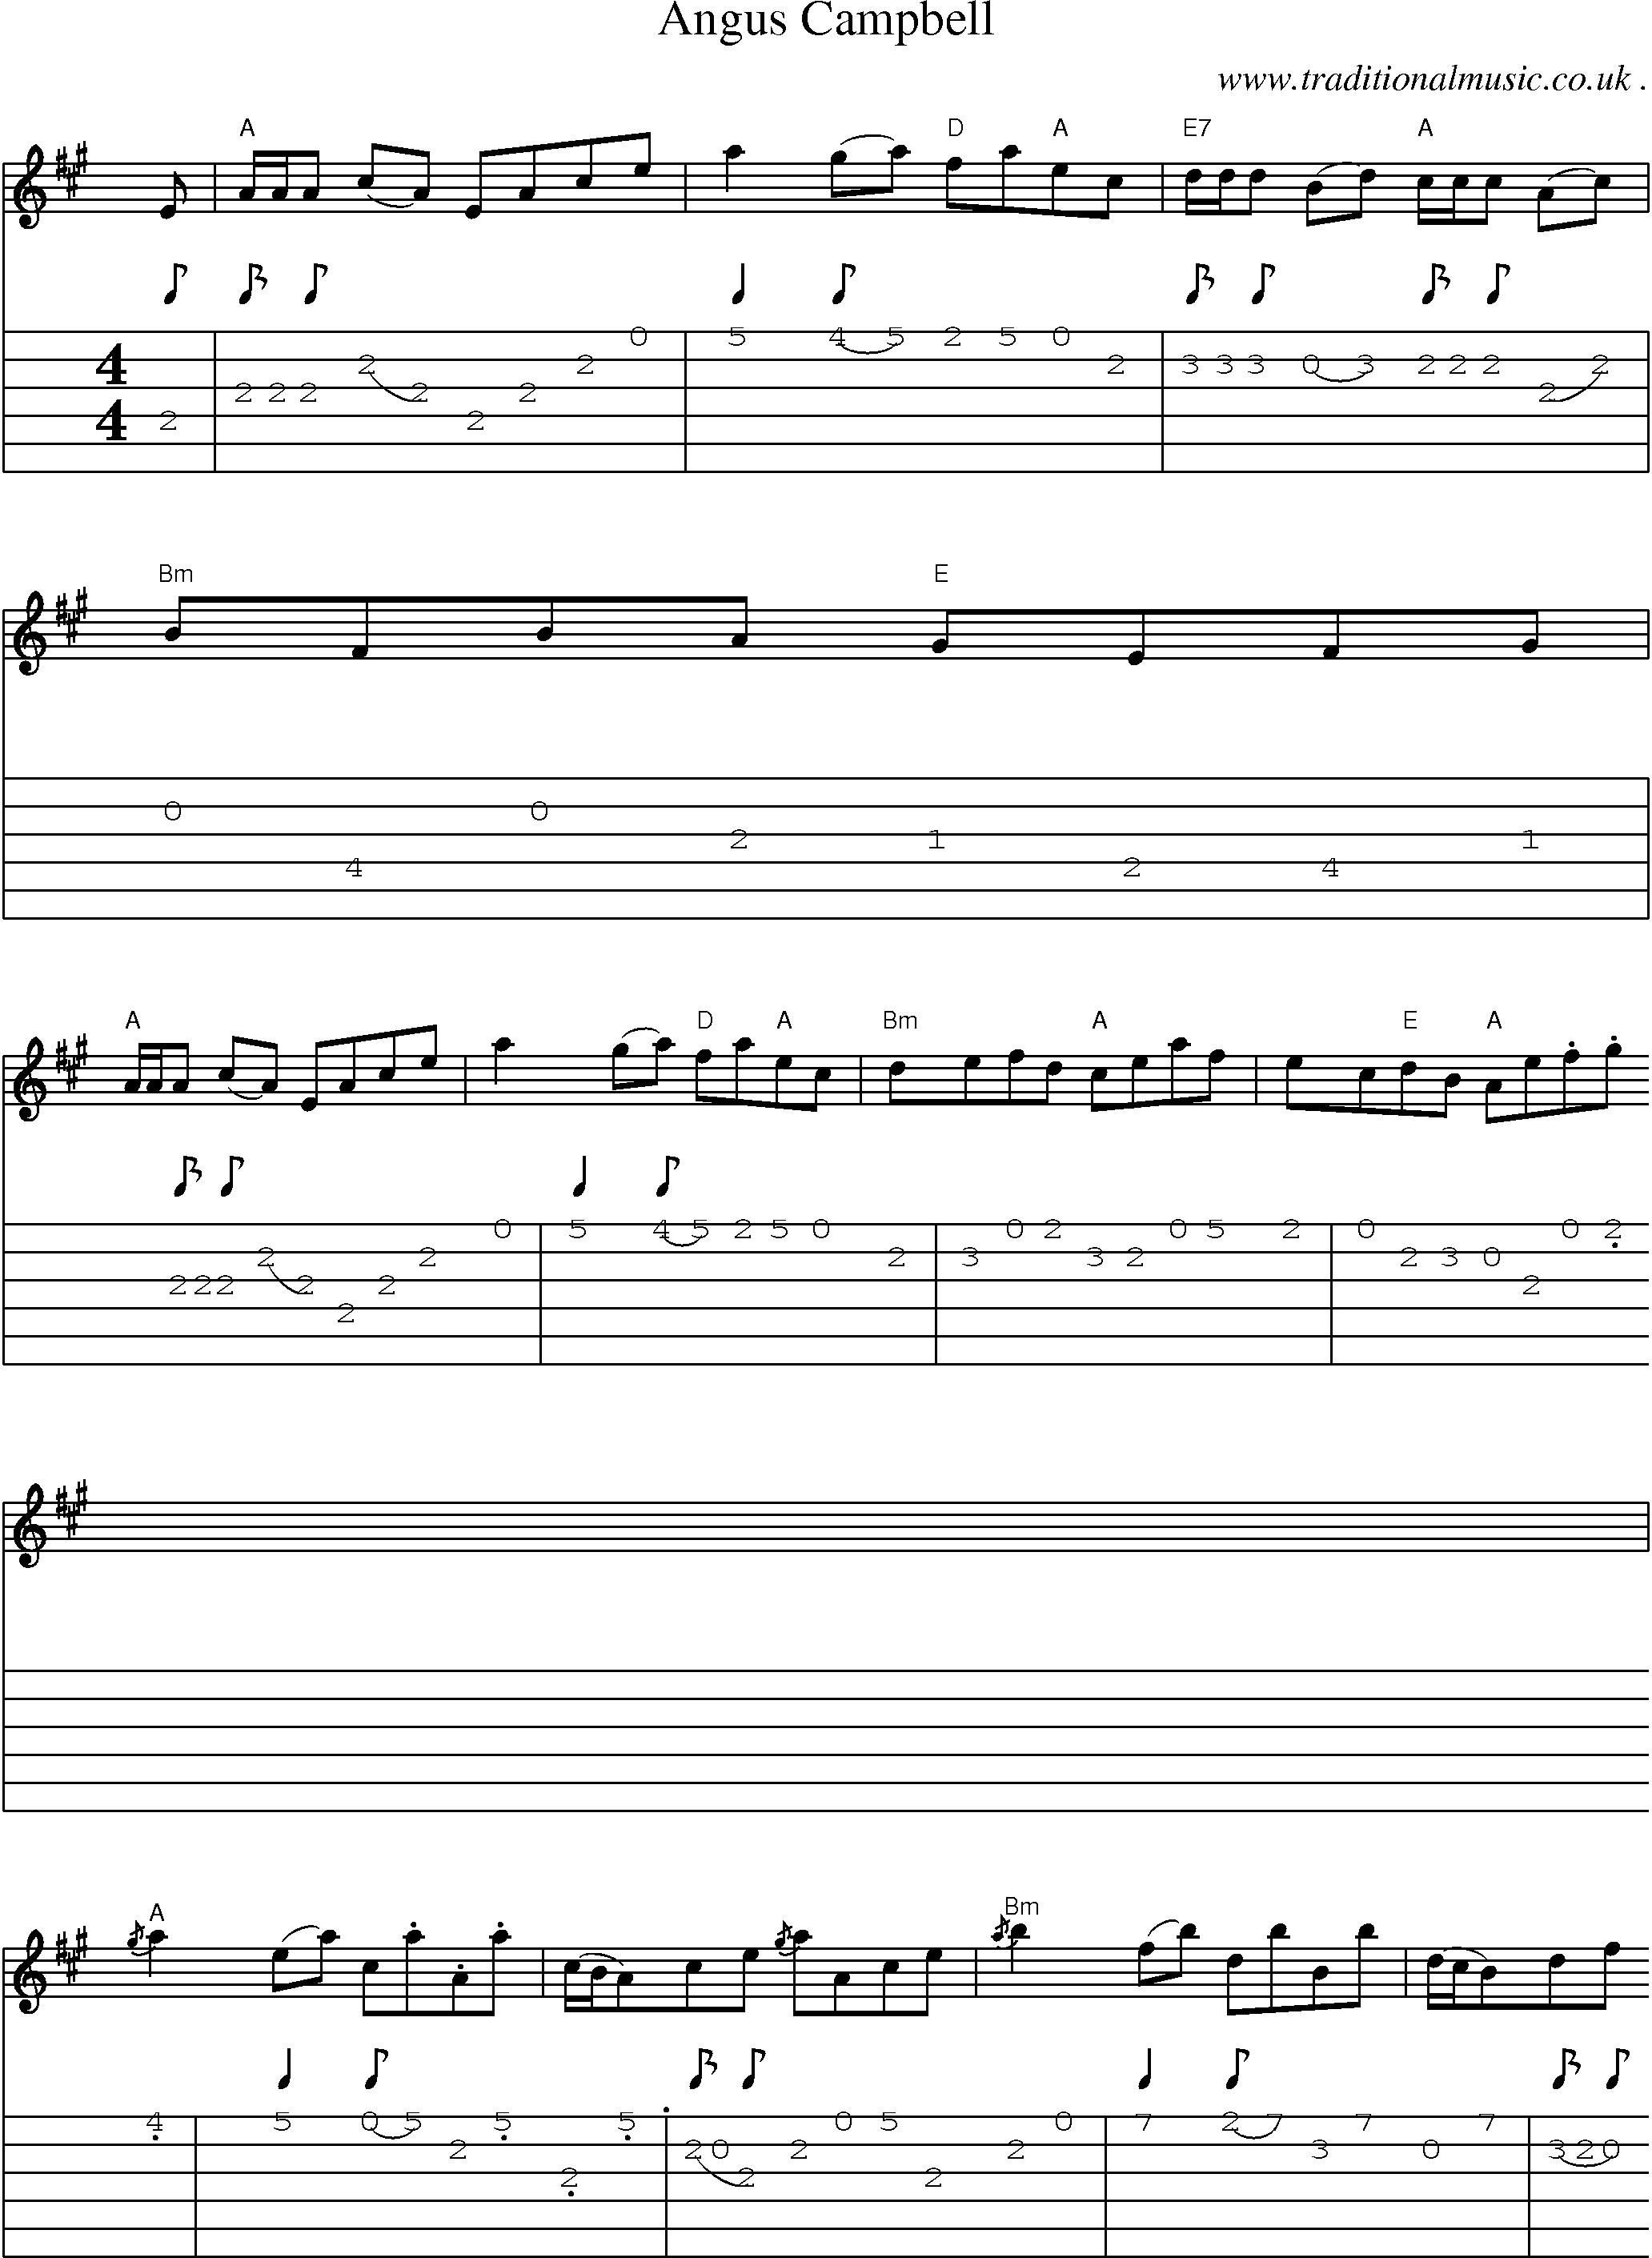 Sheet-music  score, Chords and Guitar Tabs for Angus Campbell